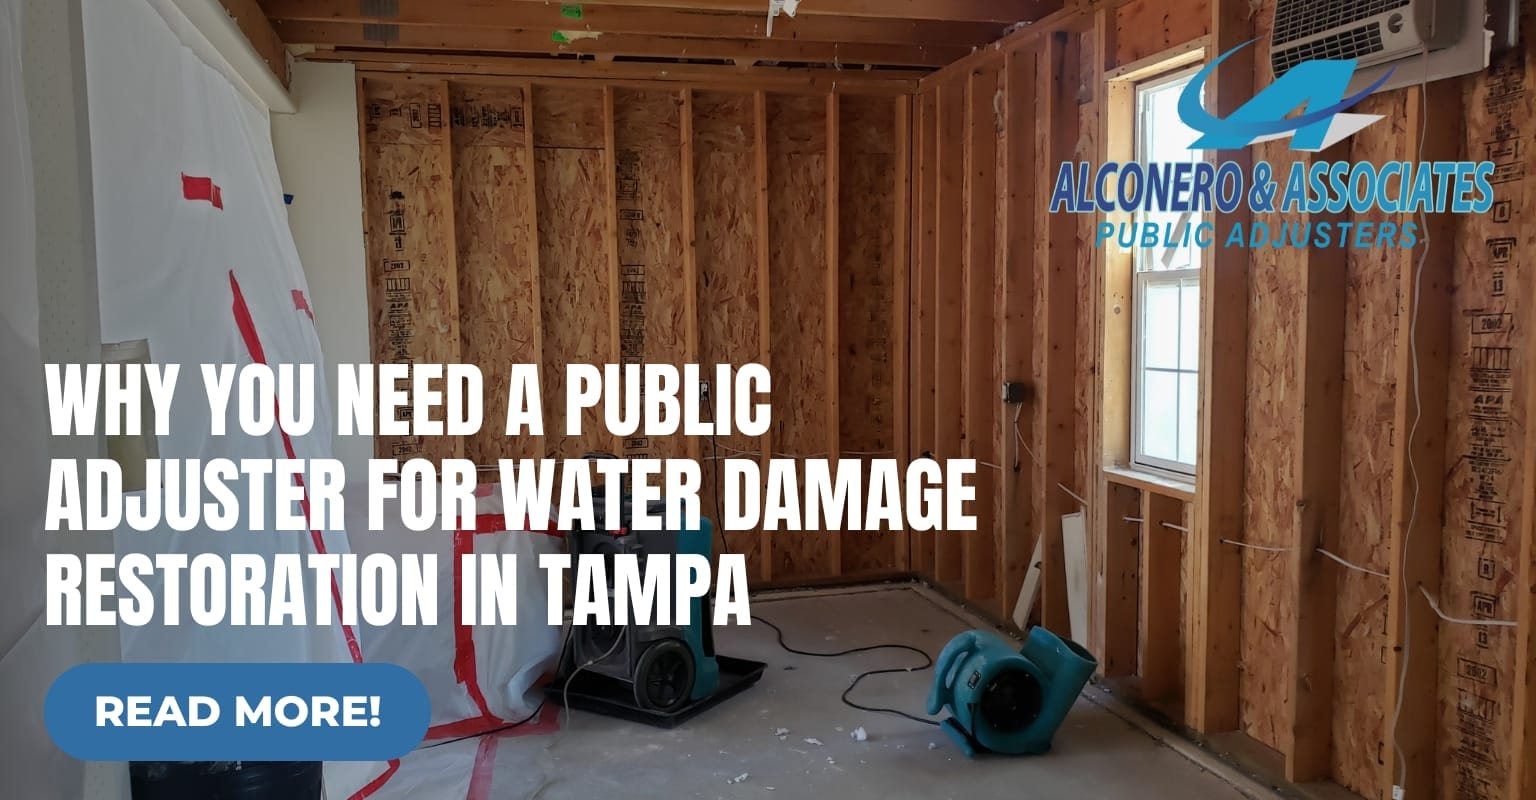 Why You Need a Public Adjuster for Water Damage Restoration in Tampa